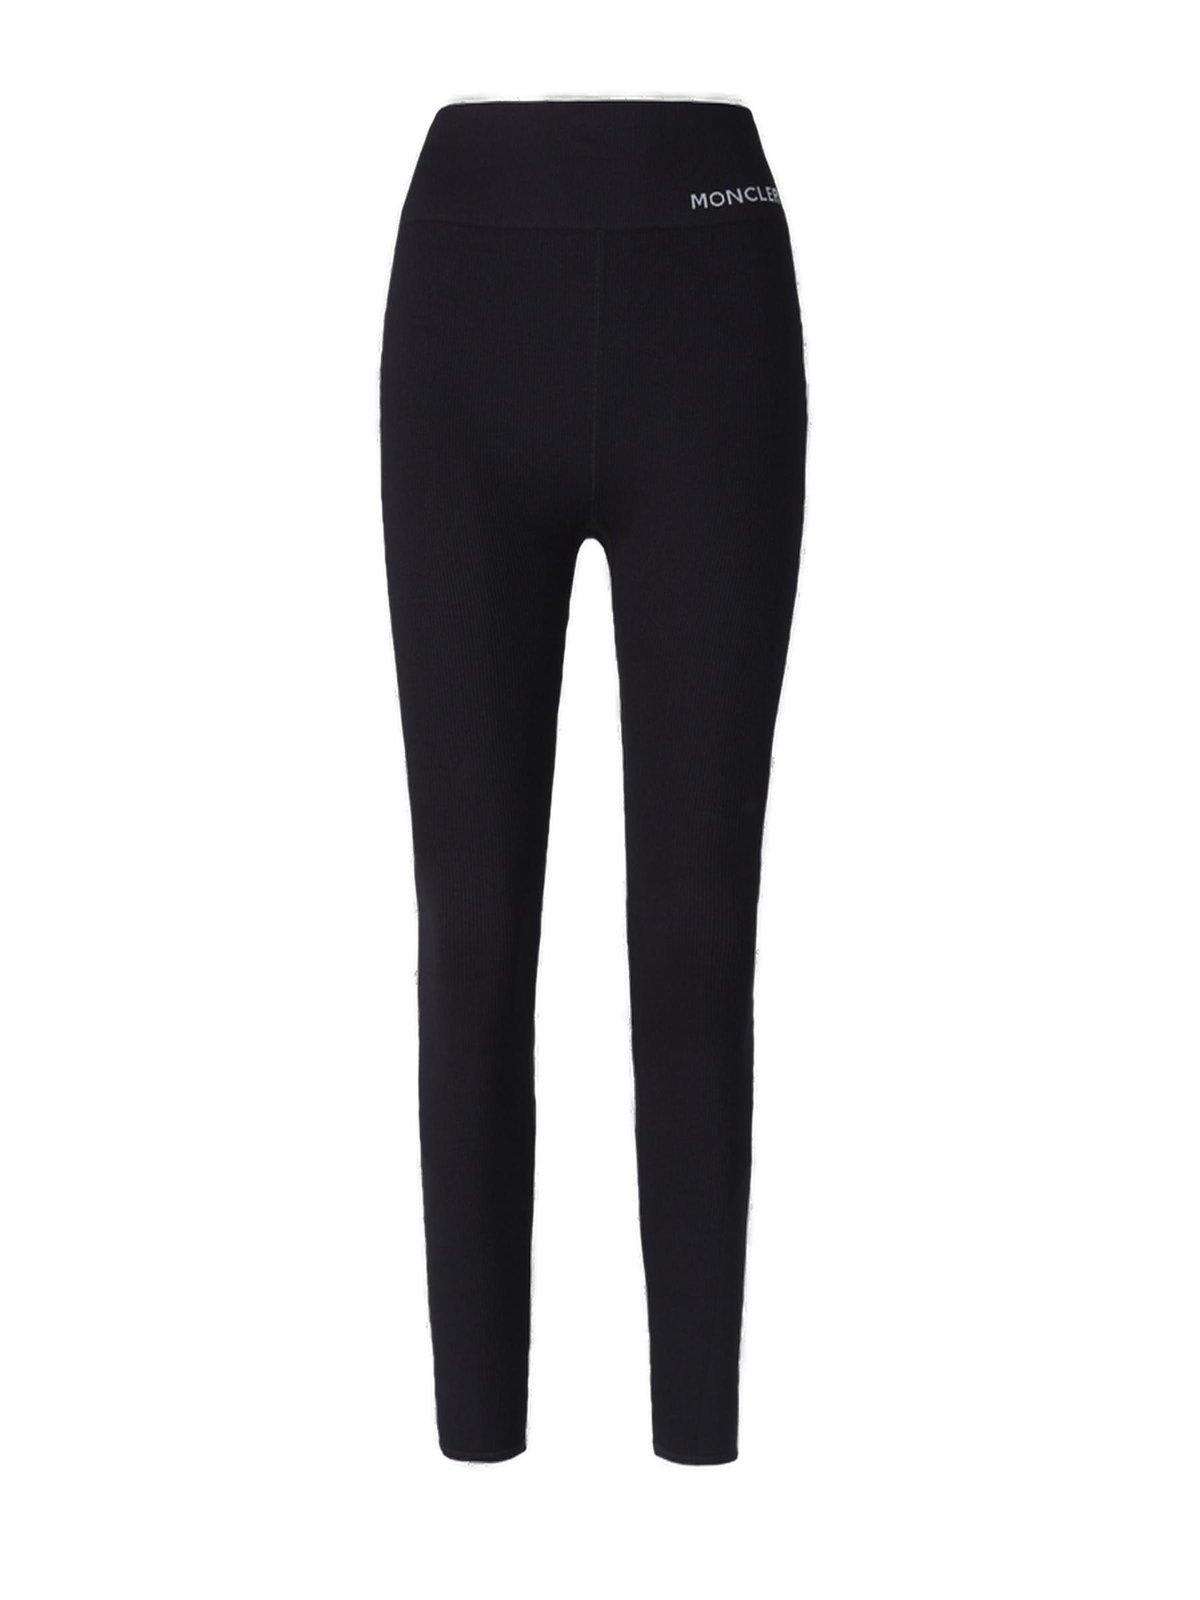 Moncler High-waist Stretched Leggings